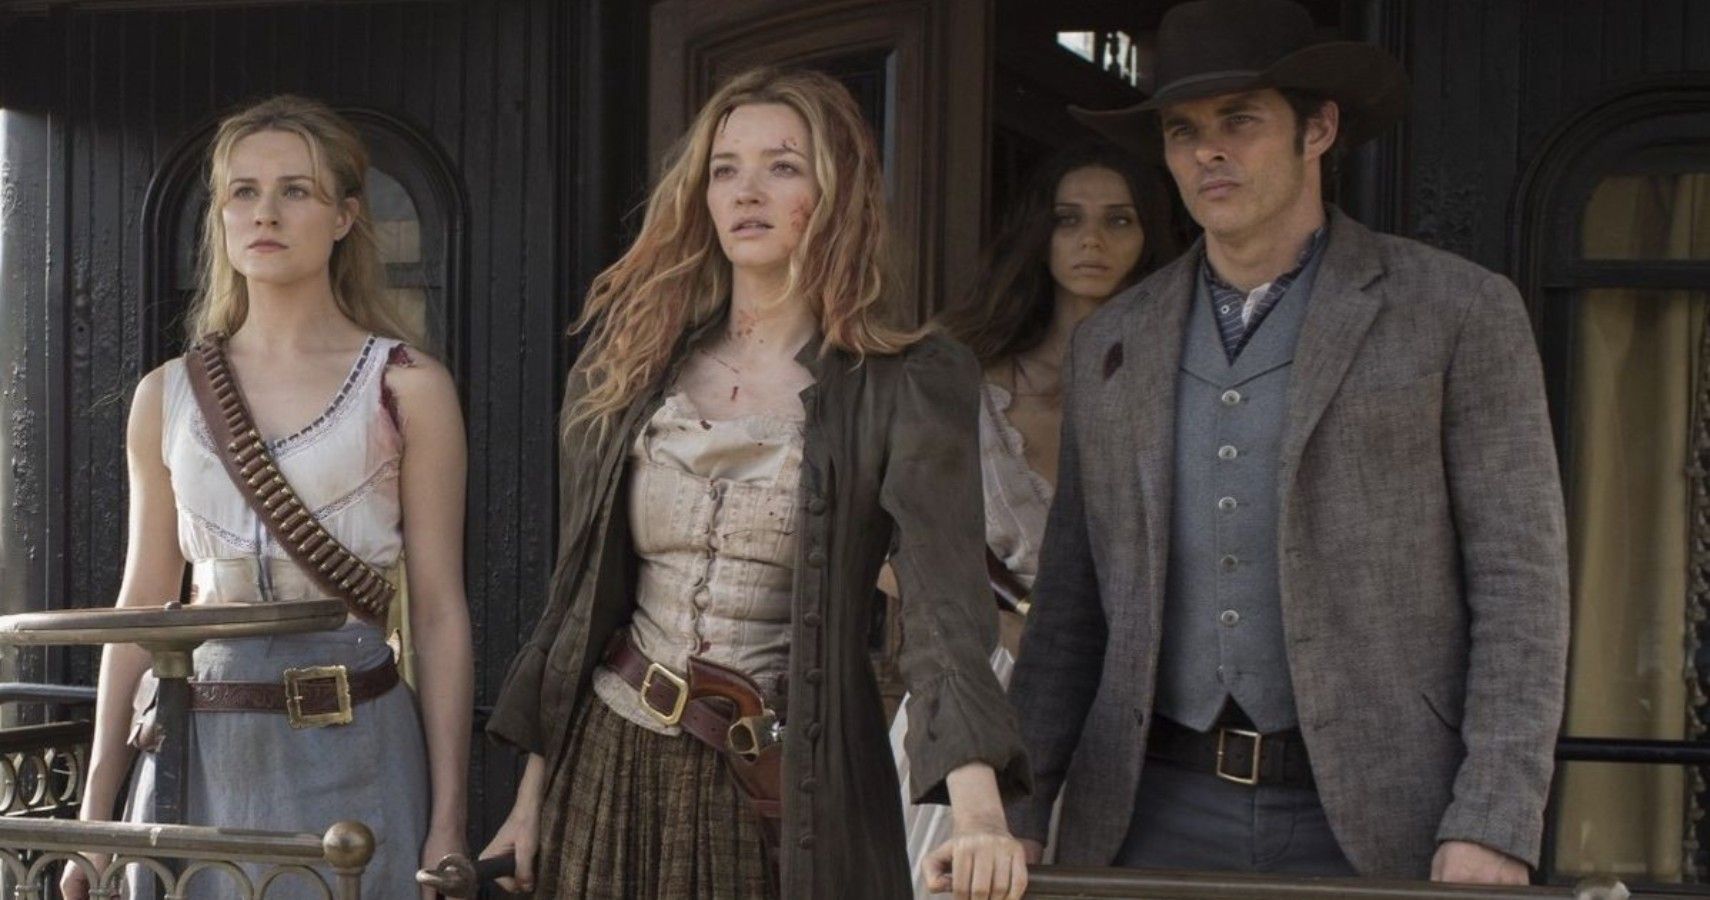 Important Looking Pirates on Westworld - article